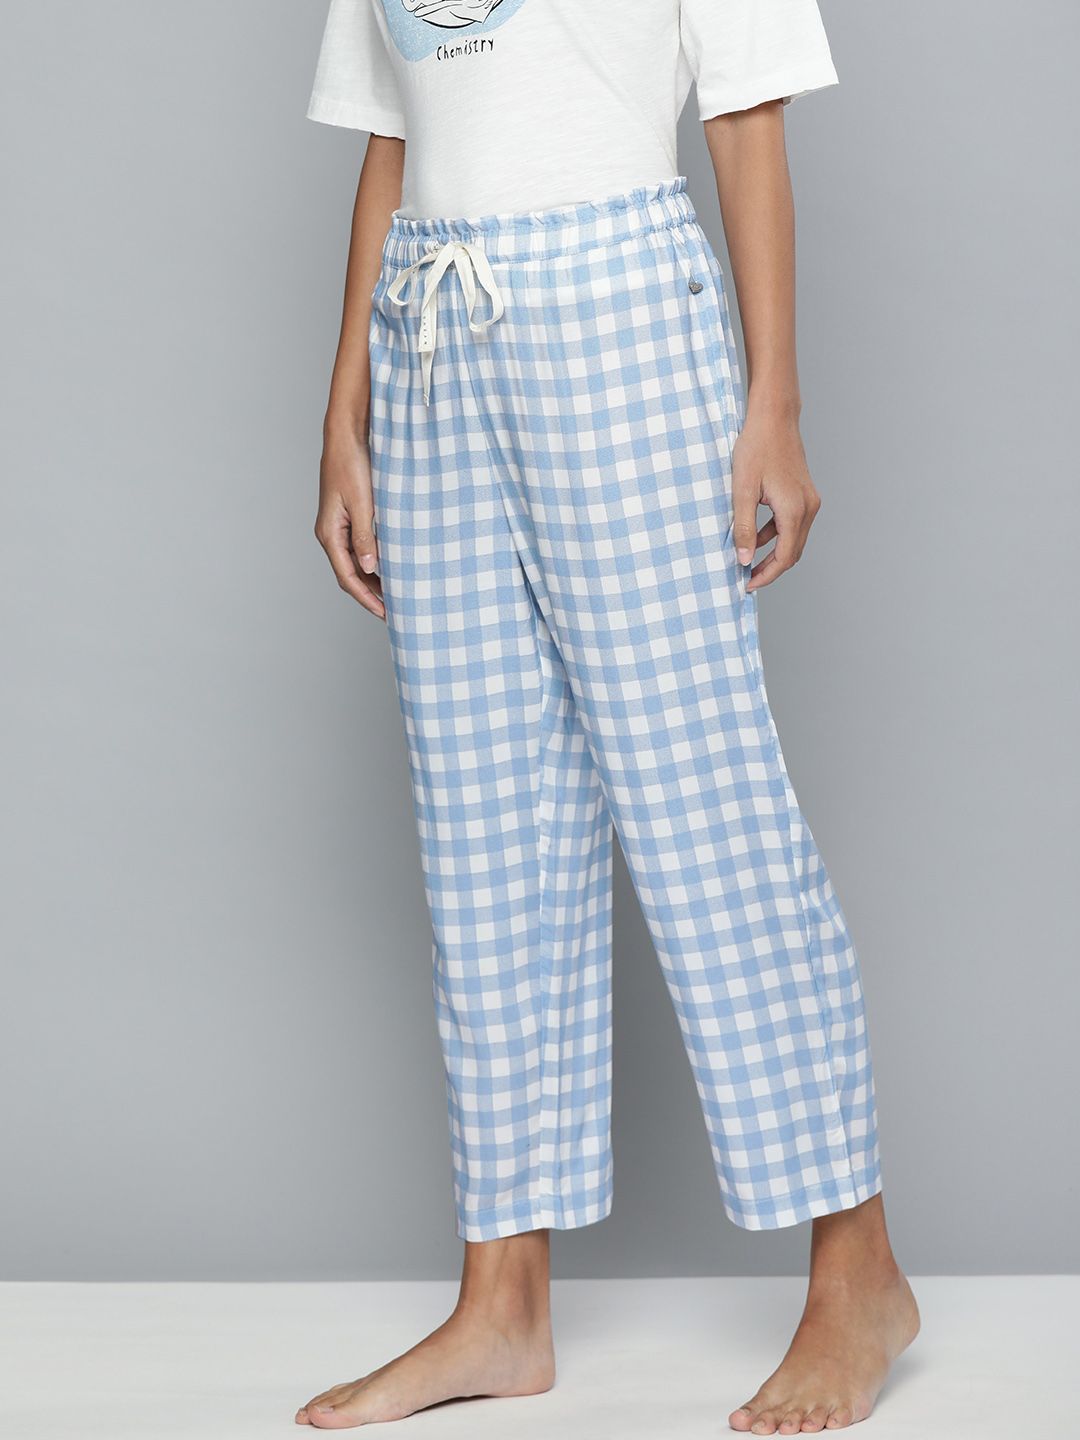 Chemistry Woman's Blue and White Checked Lounge Pants Price in India